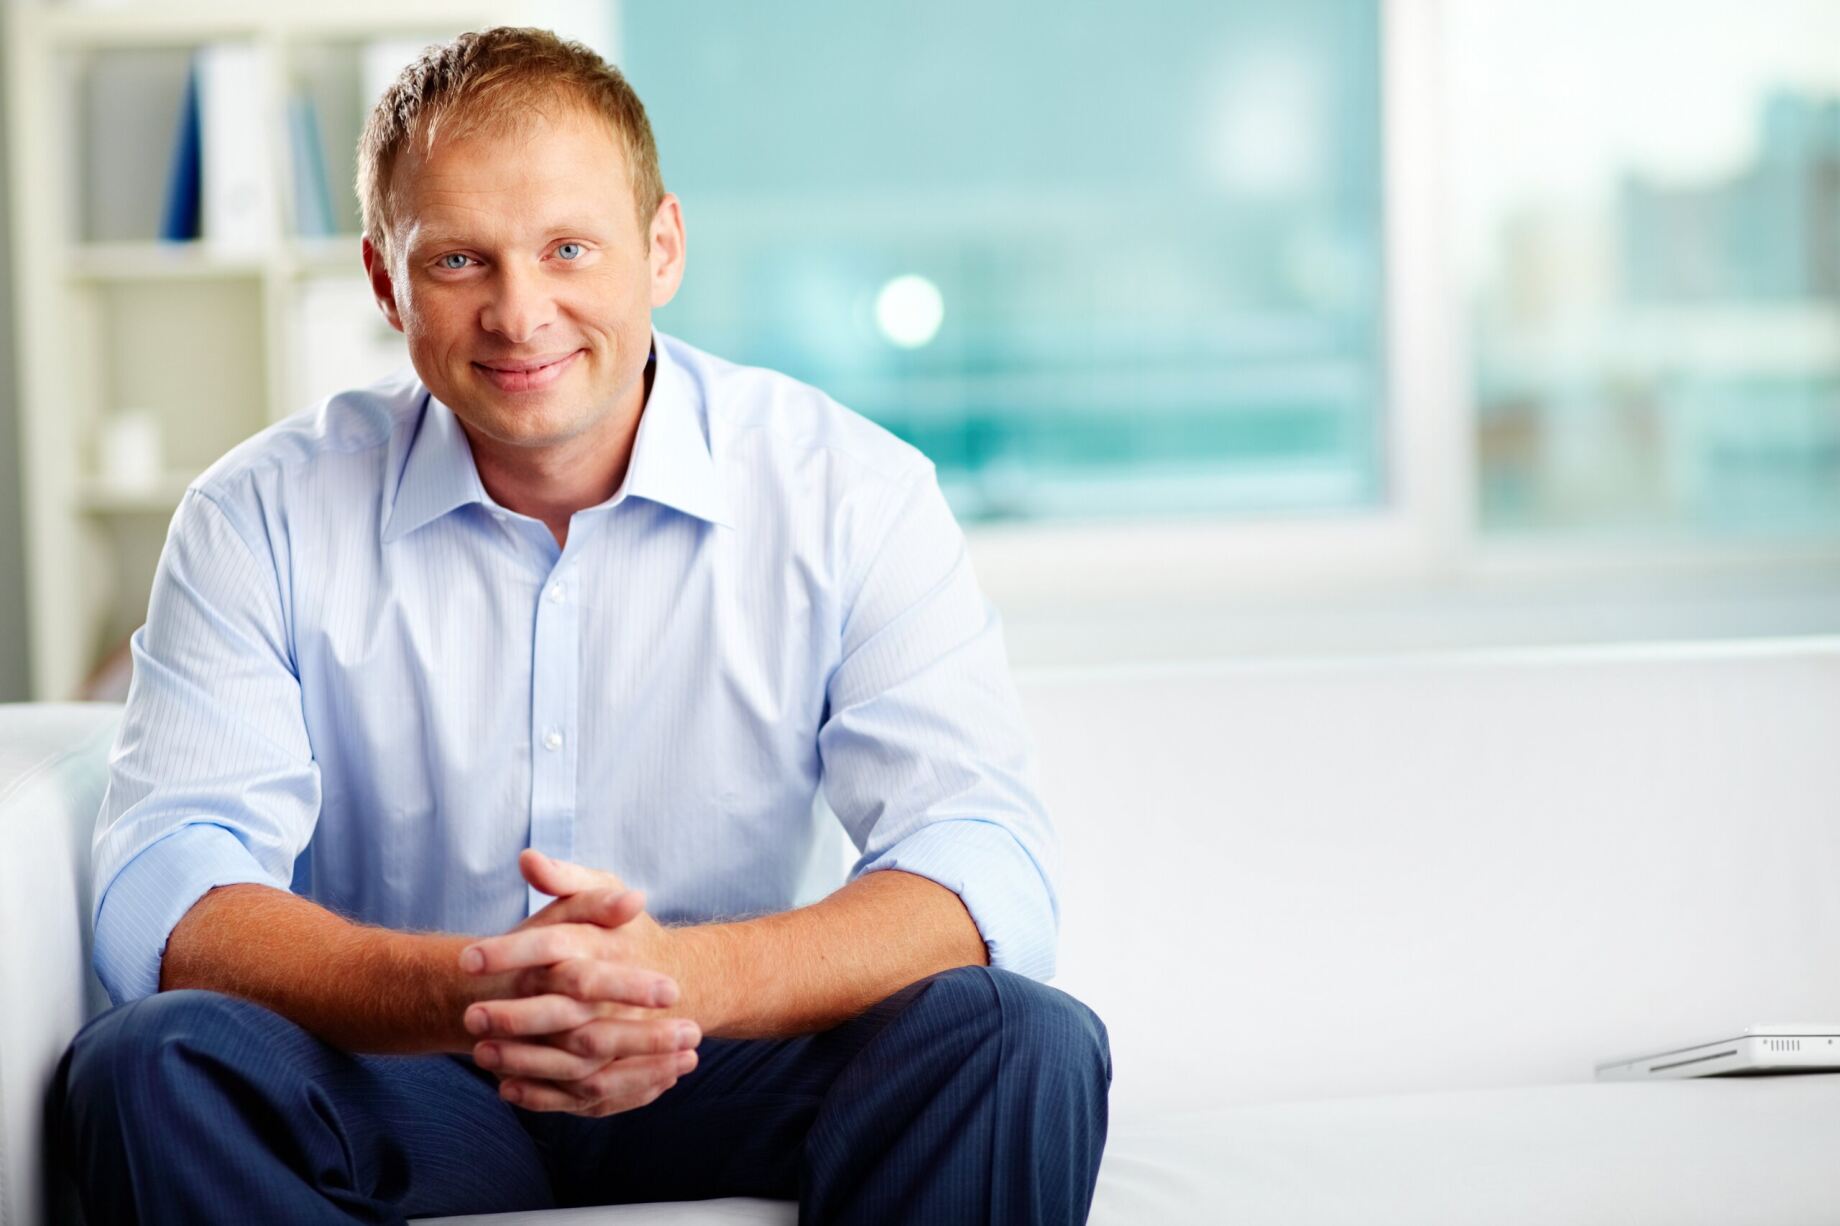 Sintelix sales consultant sitting on white couch